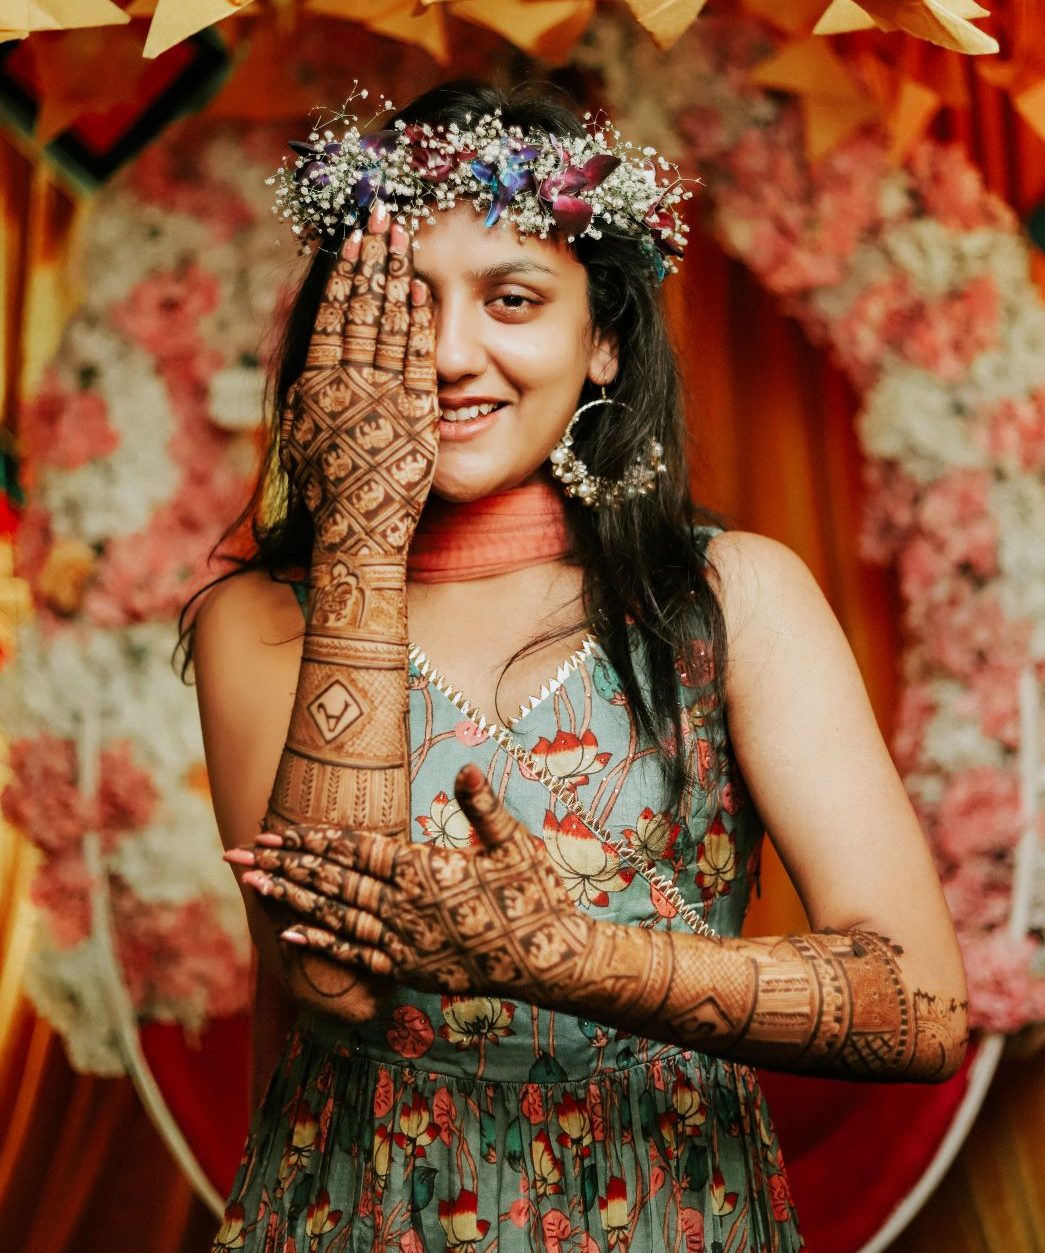 Ideas for mehndi pose for the best wedding photography in Chennai